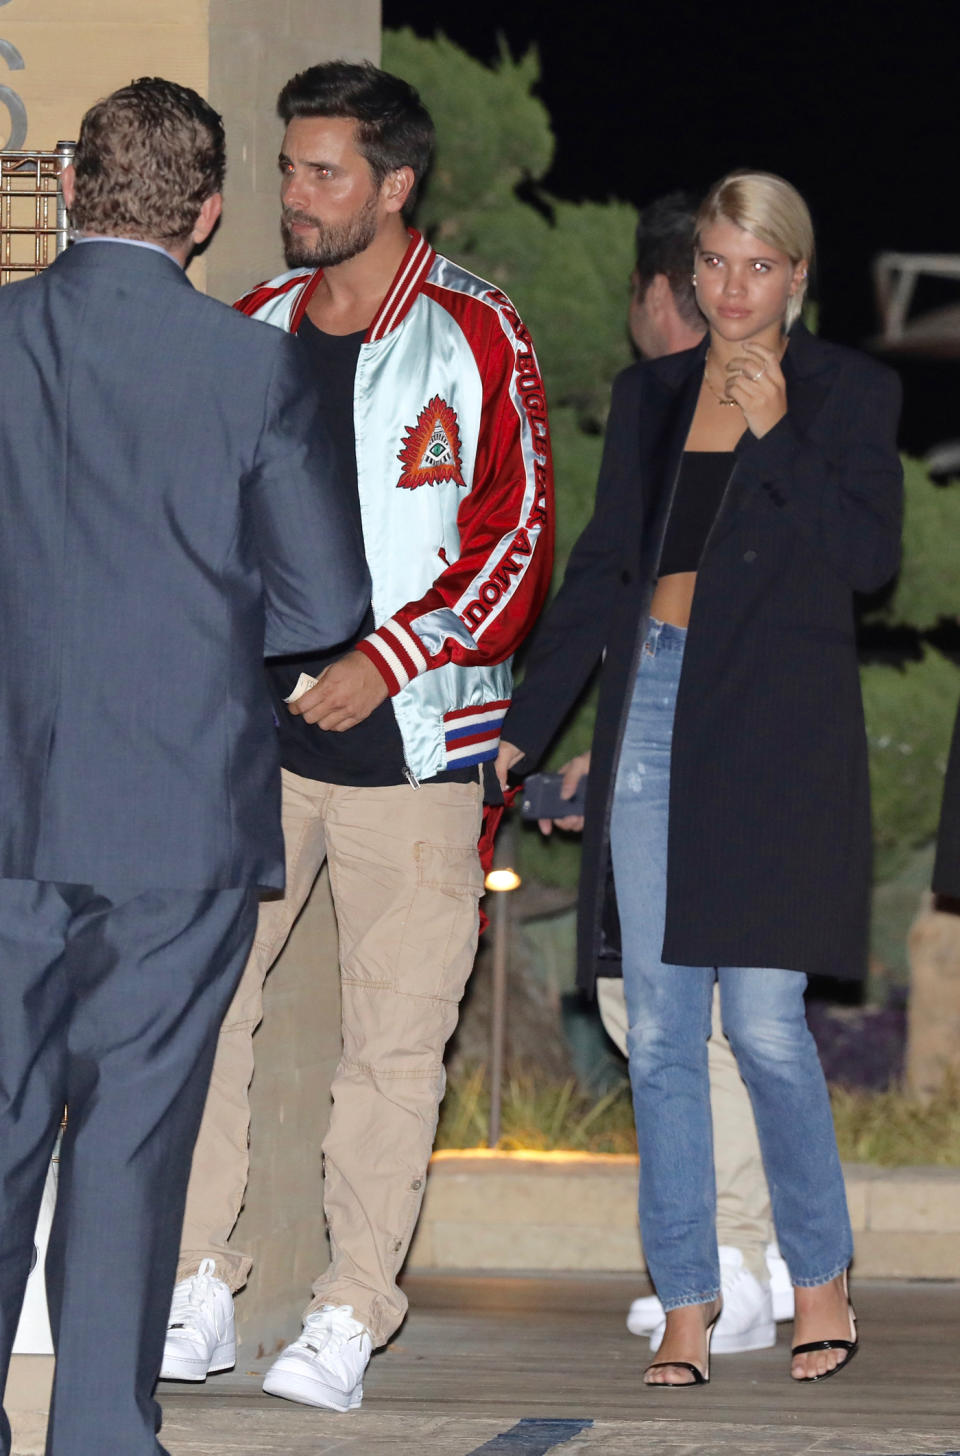 The couple is back in L.A. after their romantic Italian getaway earlier this month.